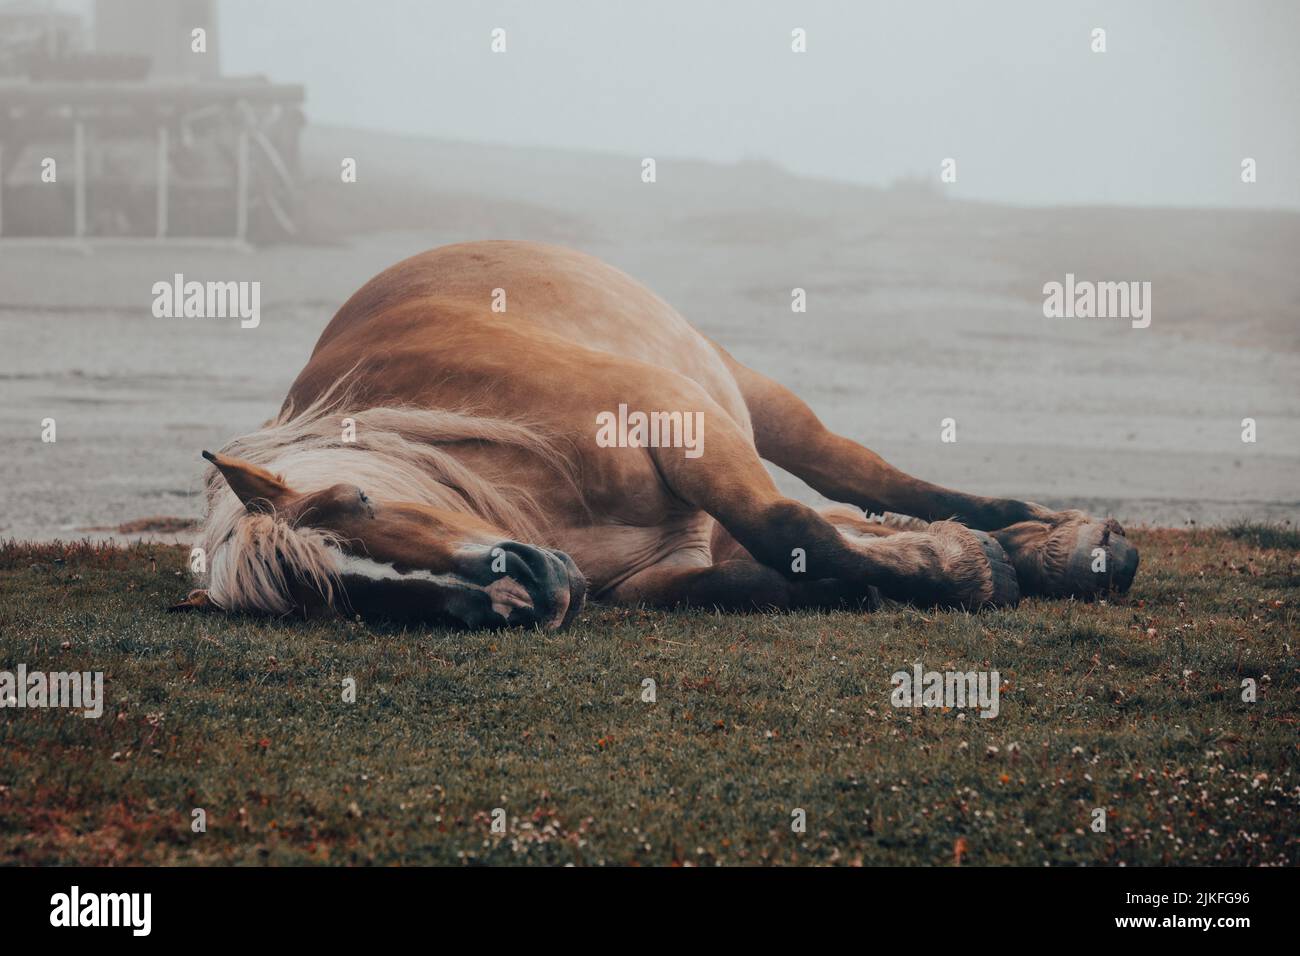 Sleeping horse laying down on mountain in the fog Stock Photo